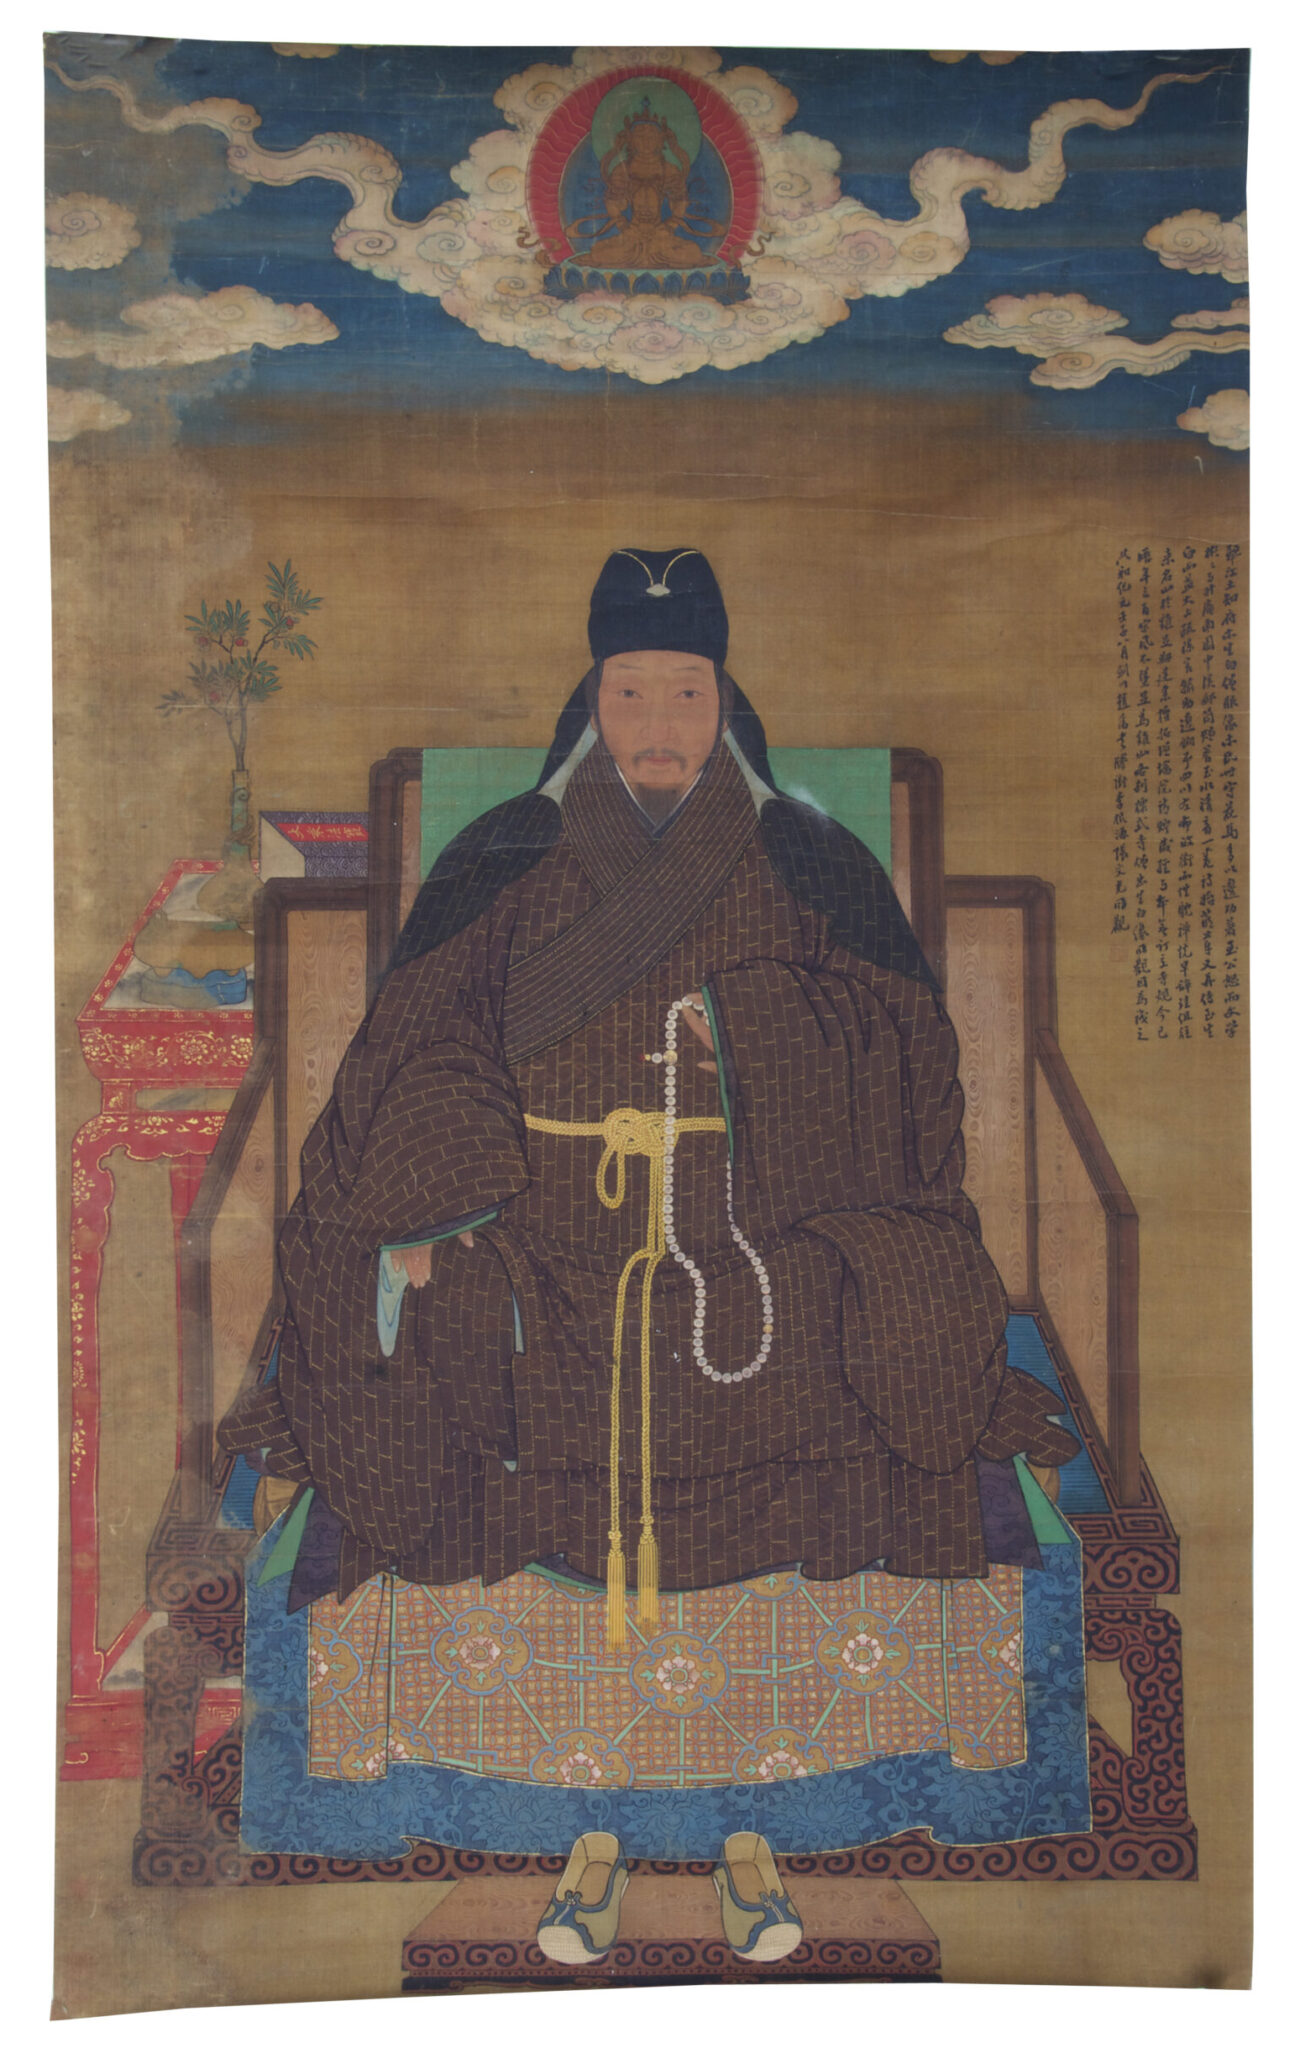 Monarch wearing brown robe seated on throne underneath depiction of deity supported by cloud